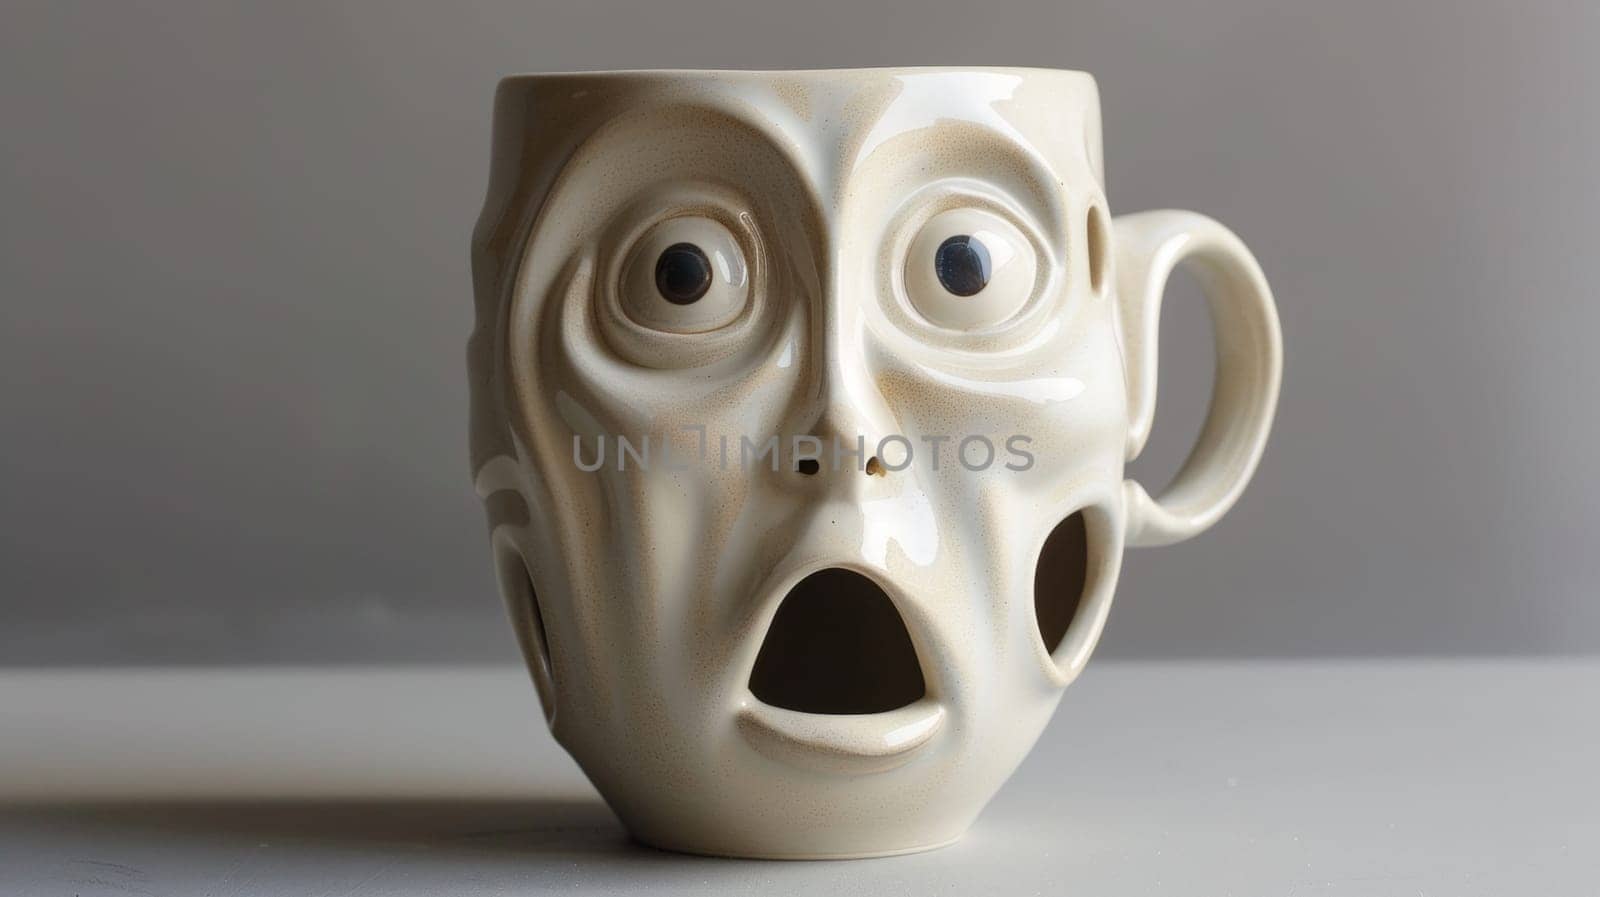 A white coffee mug with a face on it sitting in front of gray background